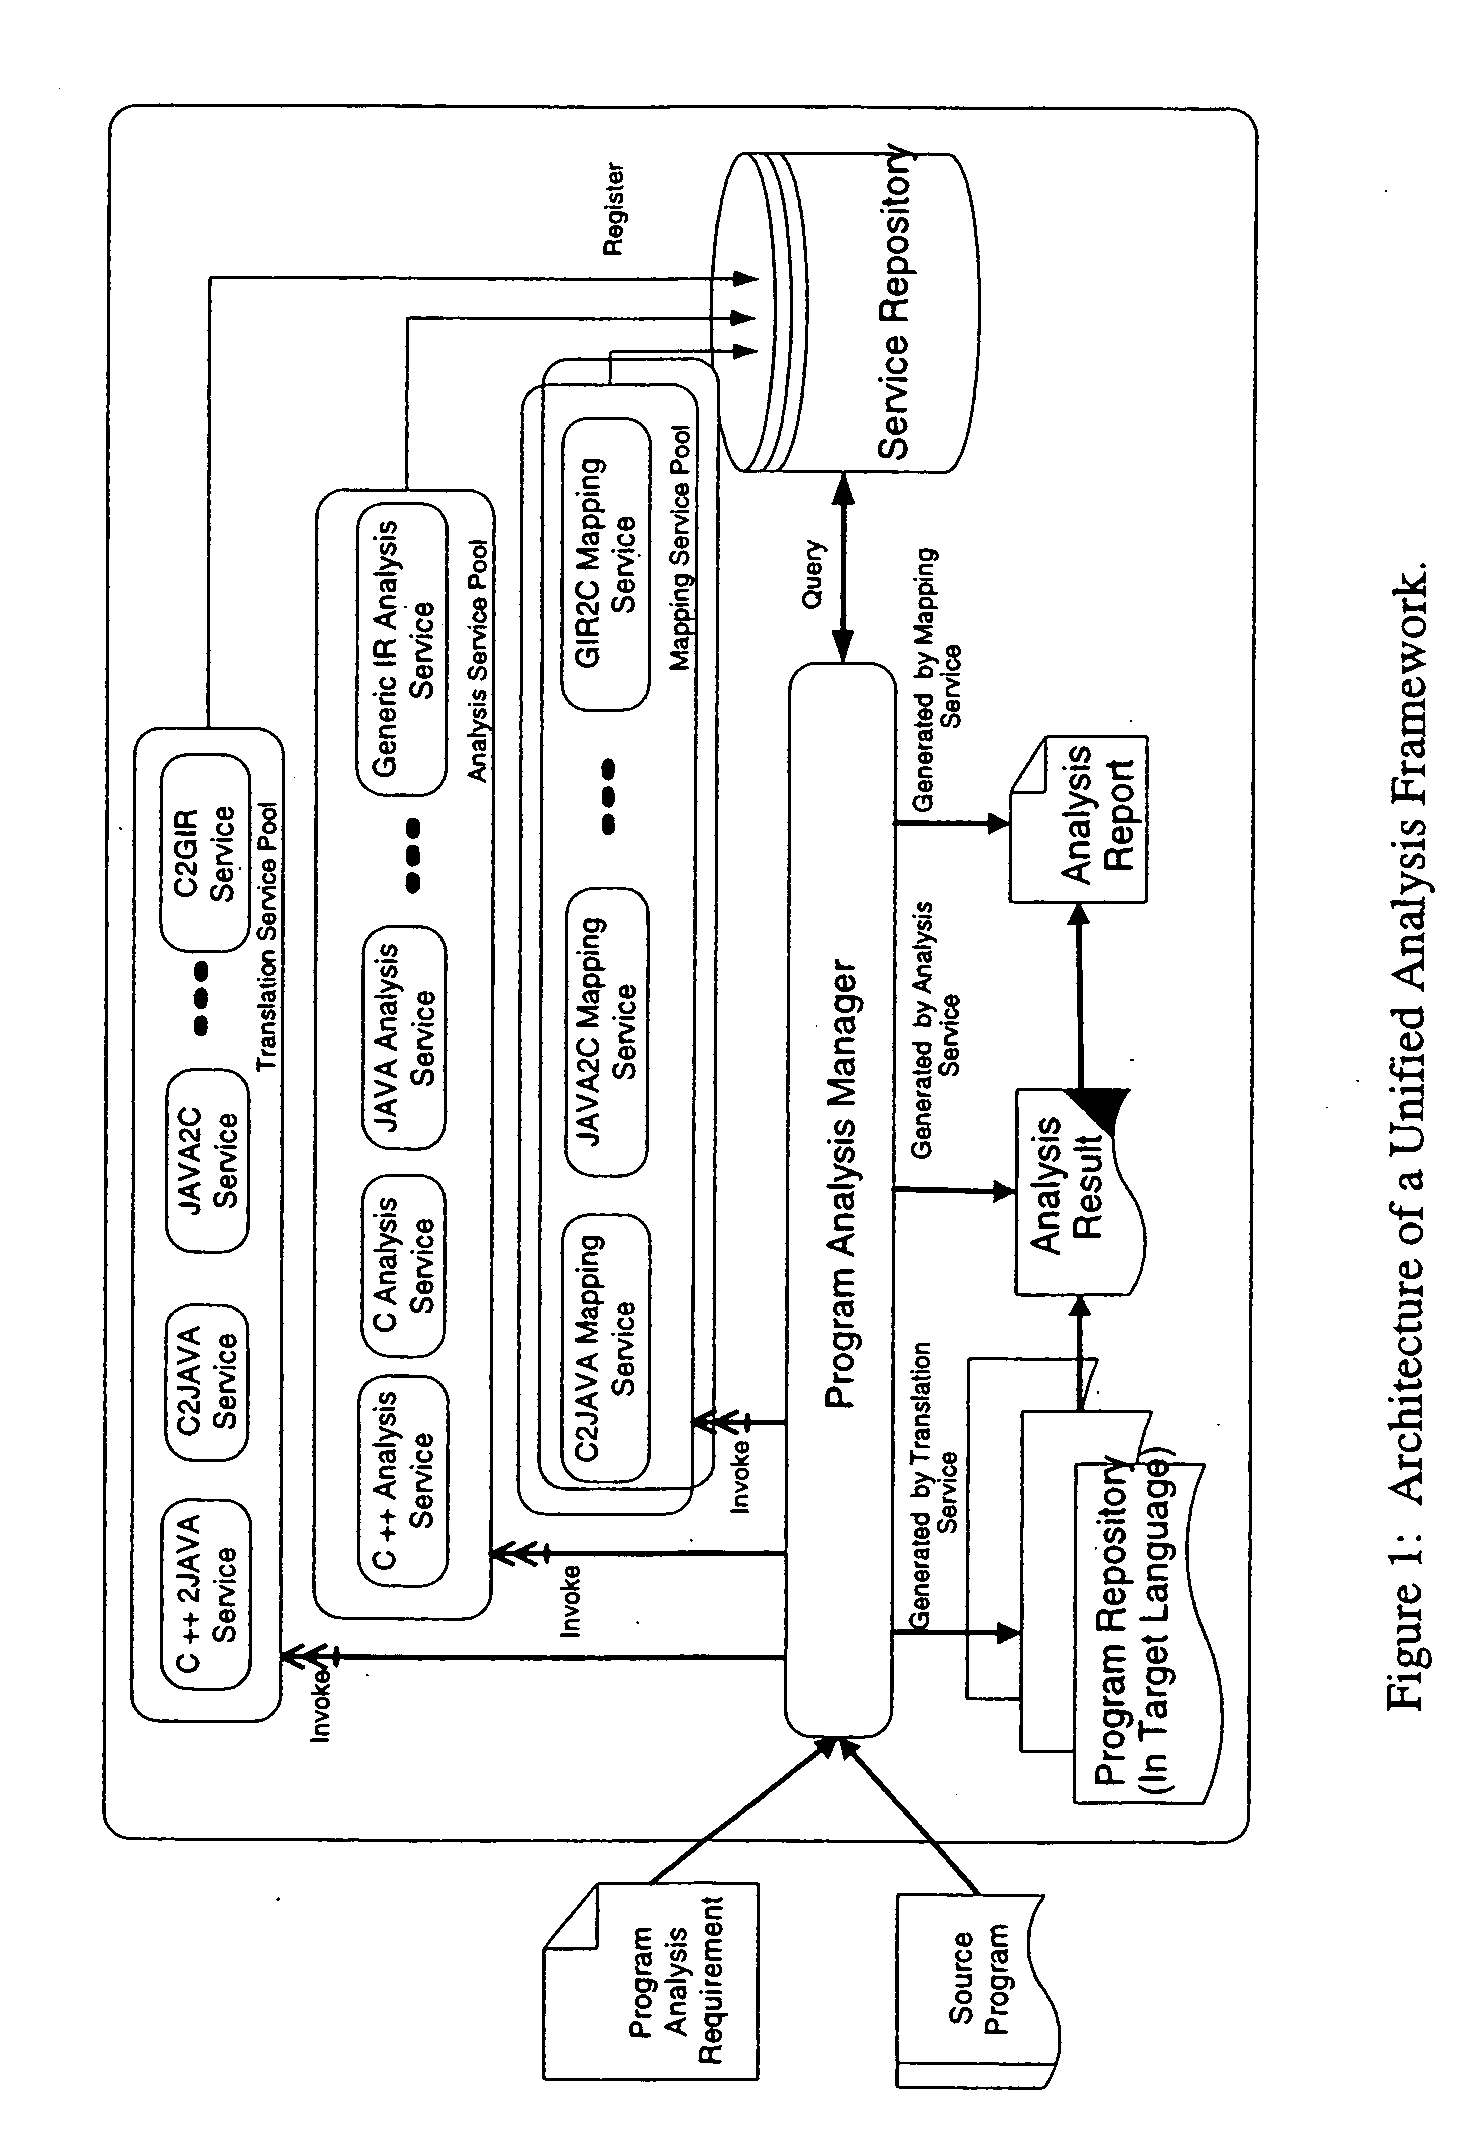 Methods and arrangements for unified program analysis